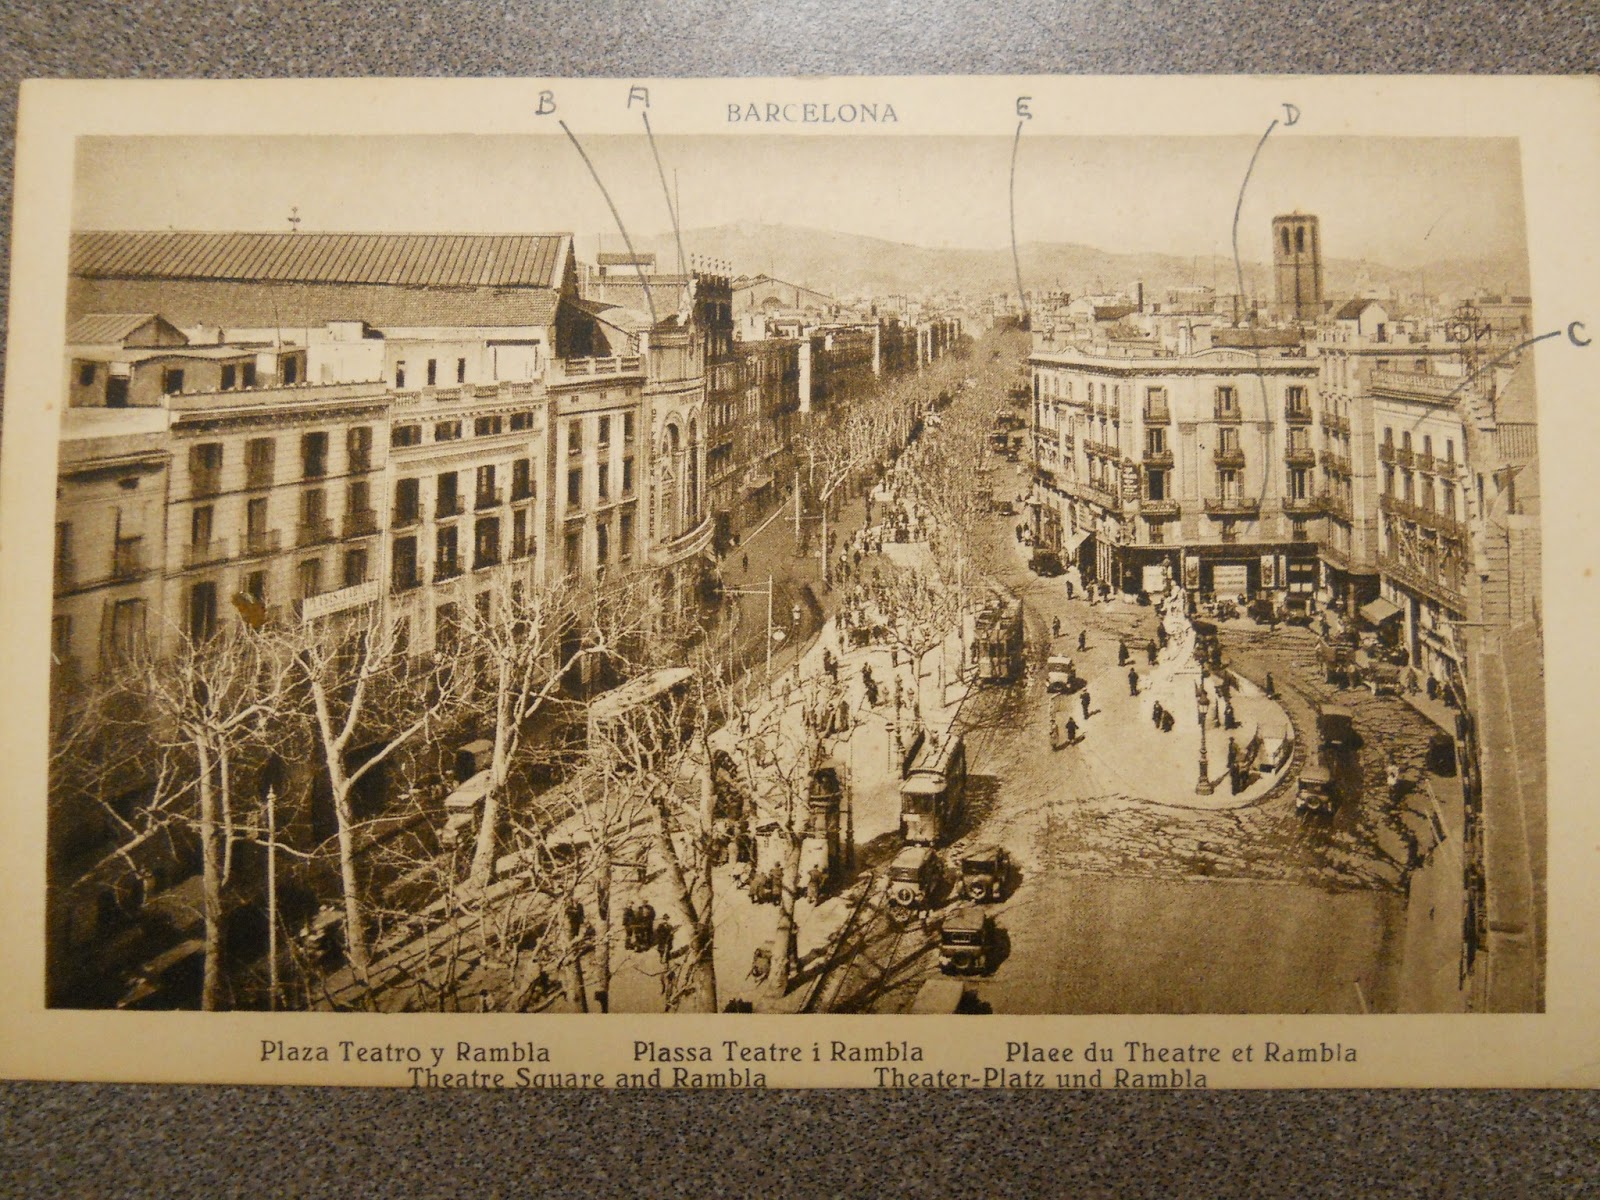 Post card of Barcelona marked with letters pertaining to the handwritten notes on the reverse side.